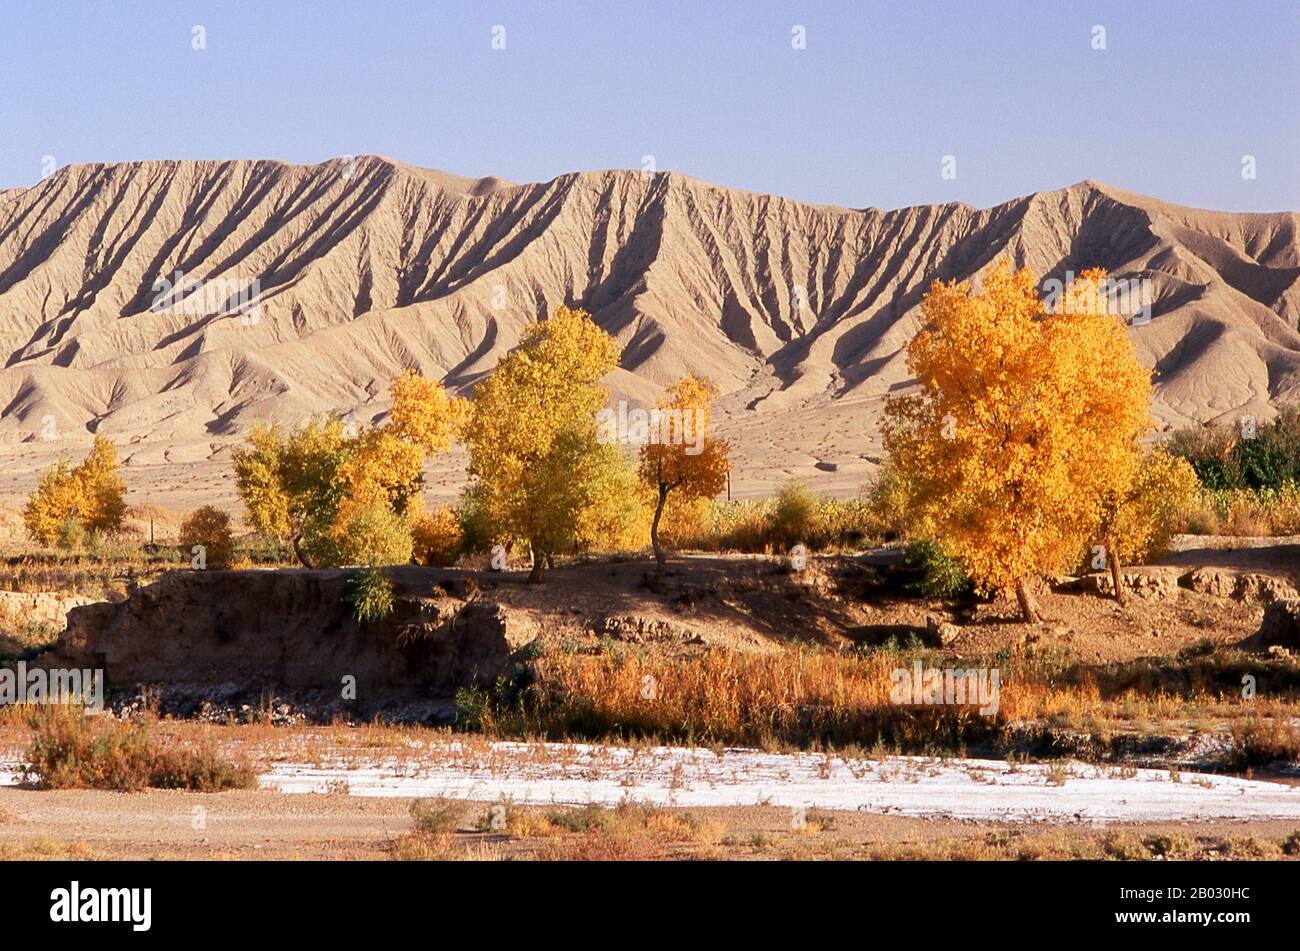 The Kunlun Mountains are one of the longest mountain chains in Asia, extending more than 3,000 km. In the broadest sense, it forms the northern edge of the Tibetan Plateau south of the Tarim Basin and the Gansu Corridor and continues east south of the Wei River to end at the North China Plain. Stock Photo